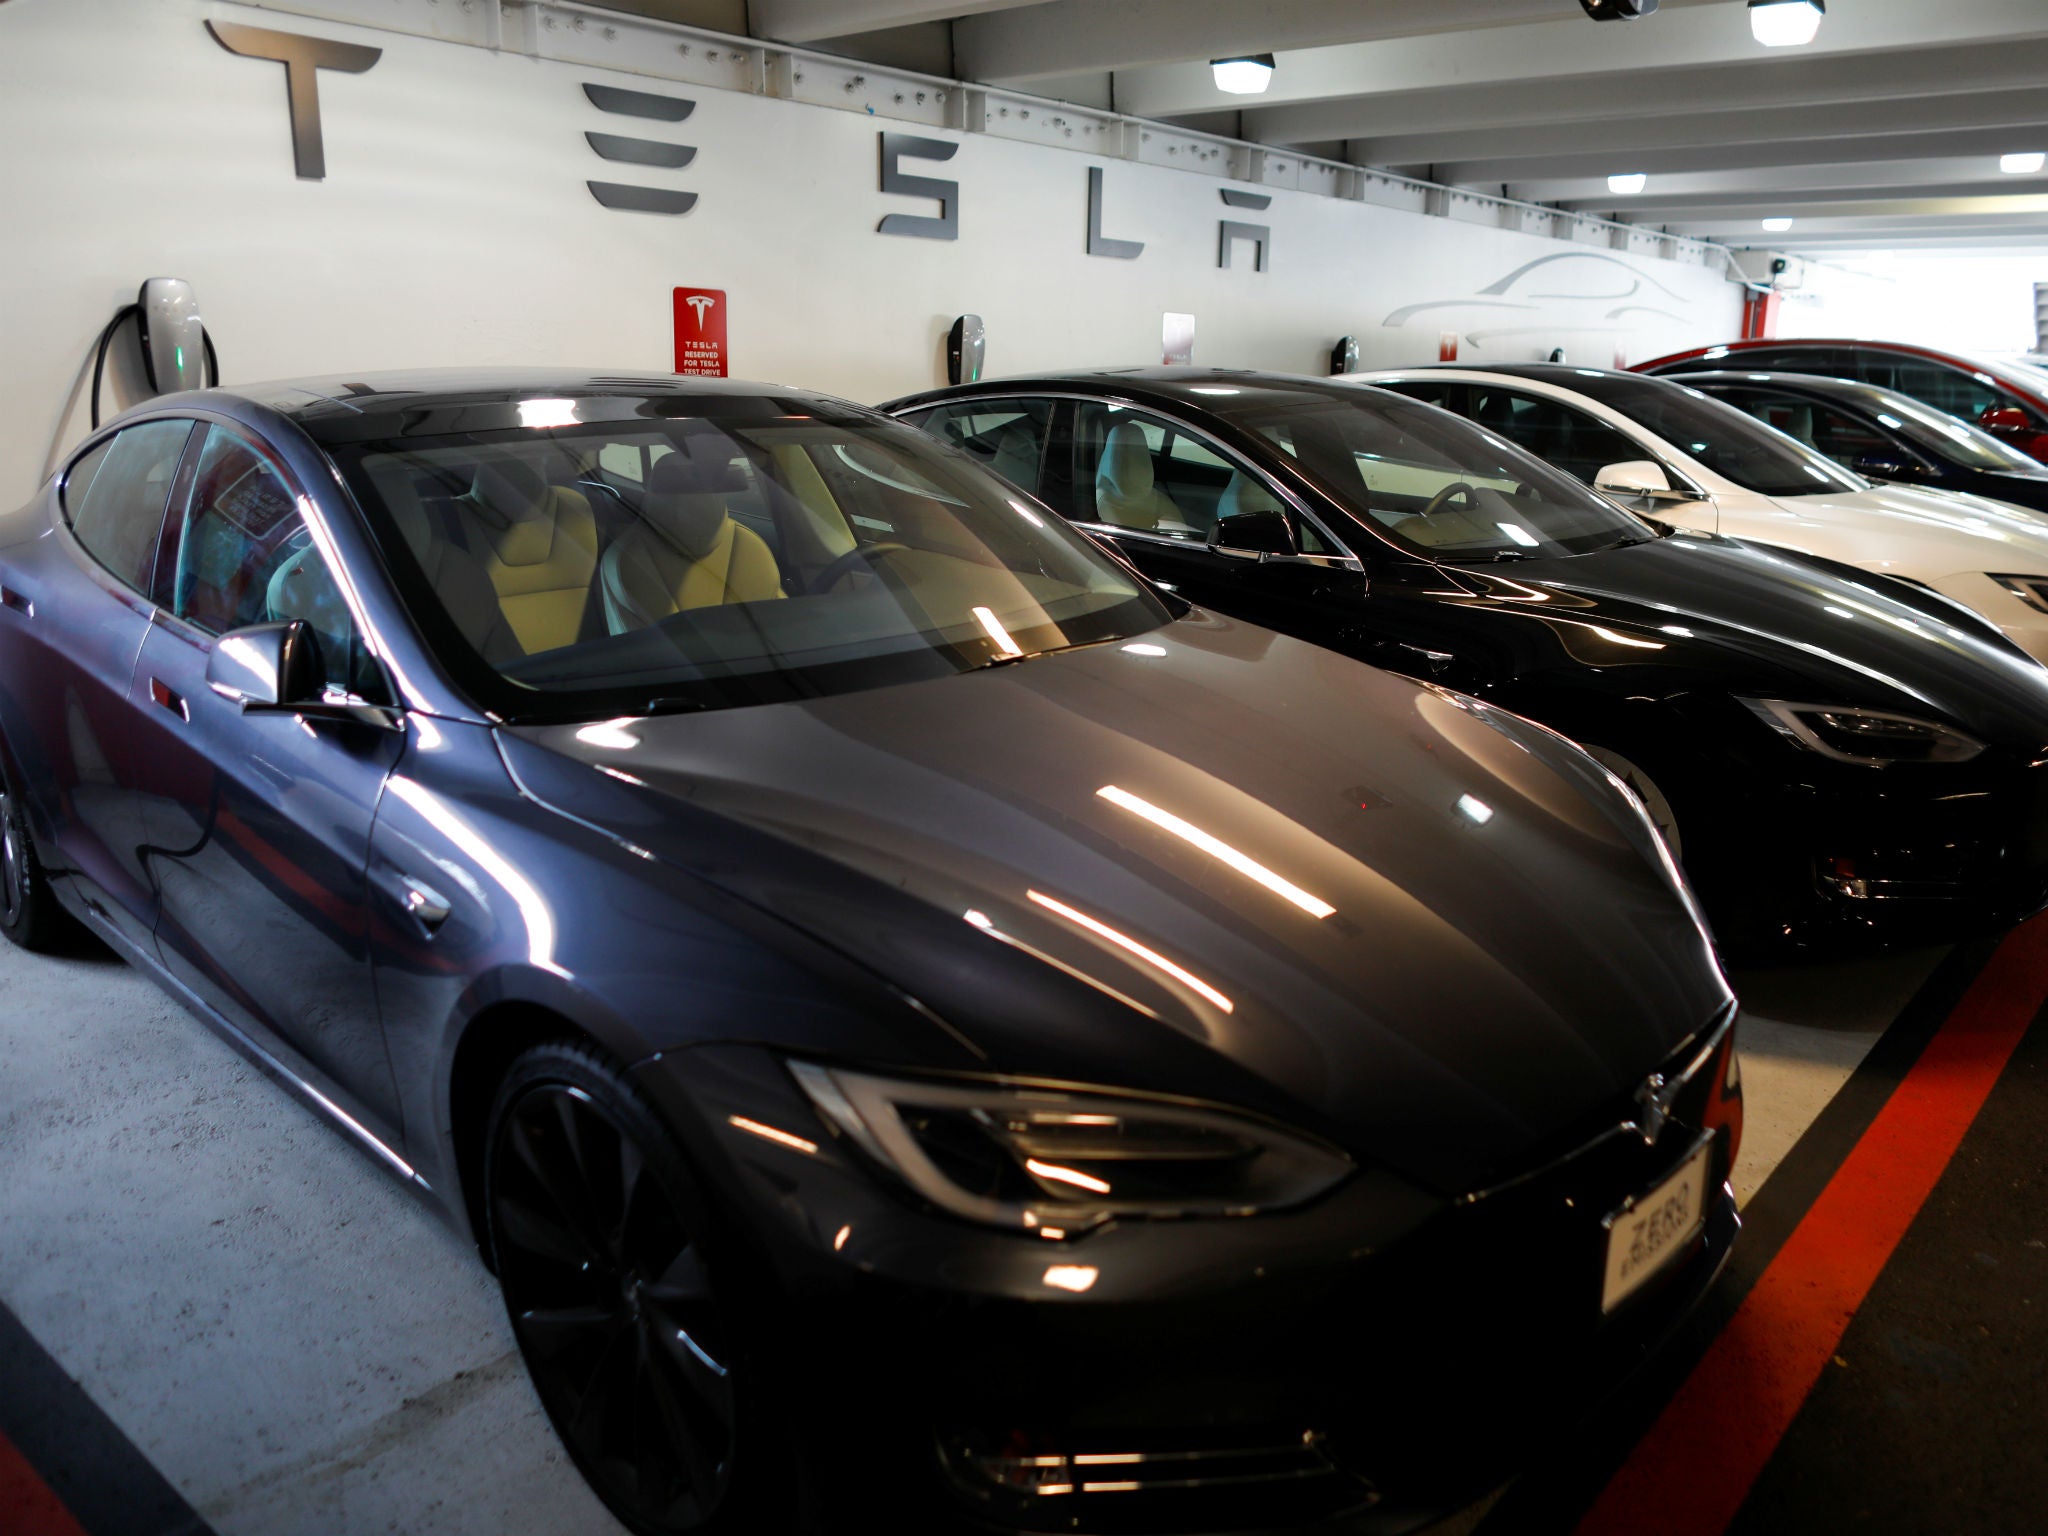 Tesla Model 3s and X's are shown charging in an underground parking lot next to a Tesla store in San Diego, California